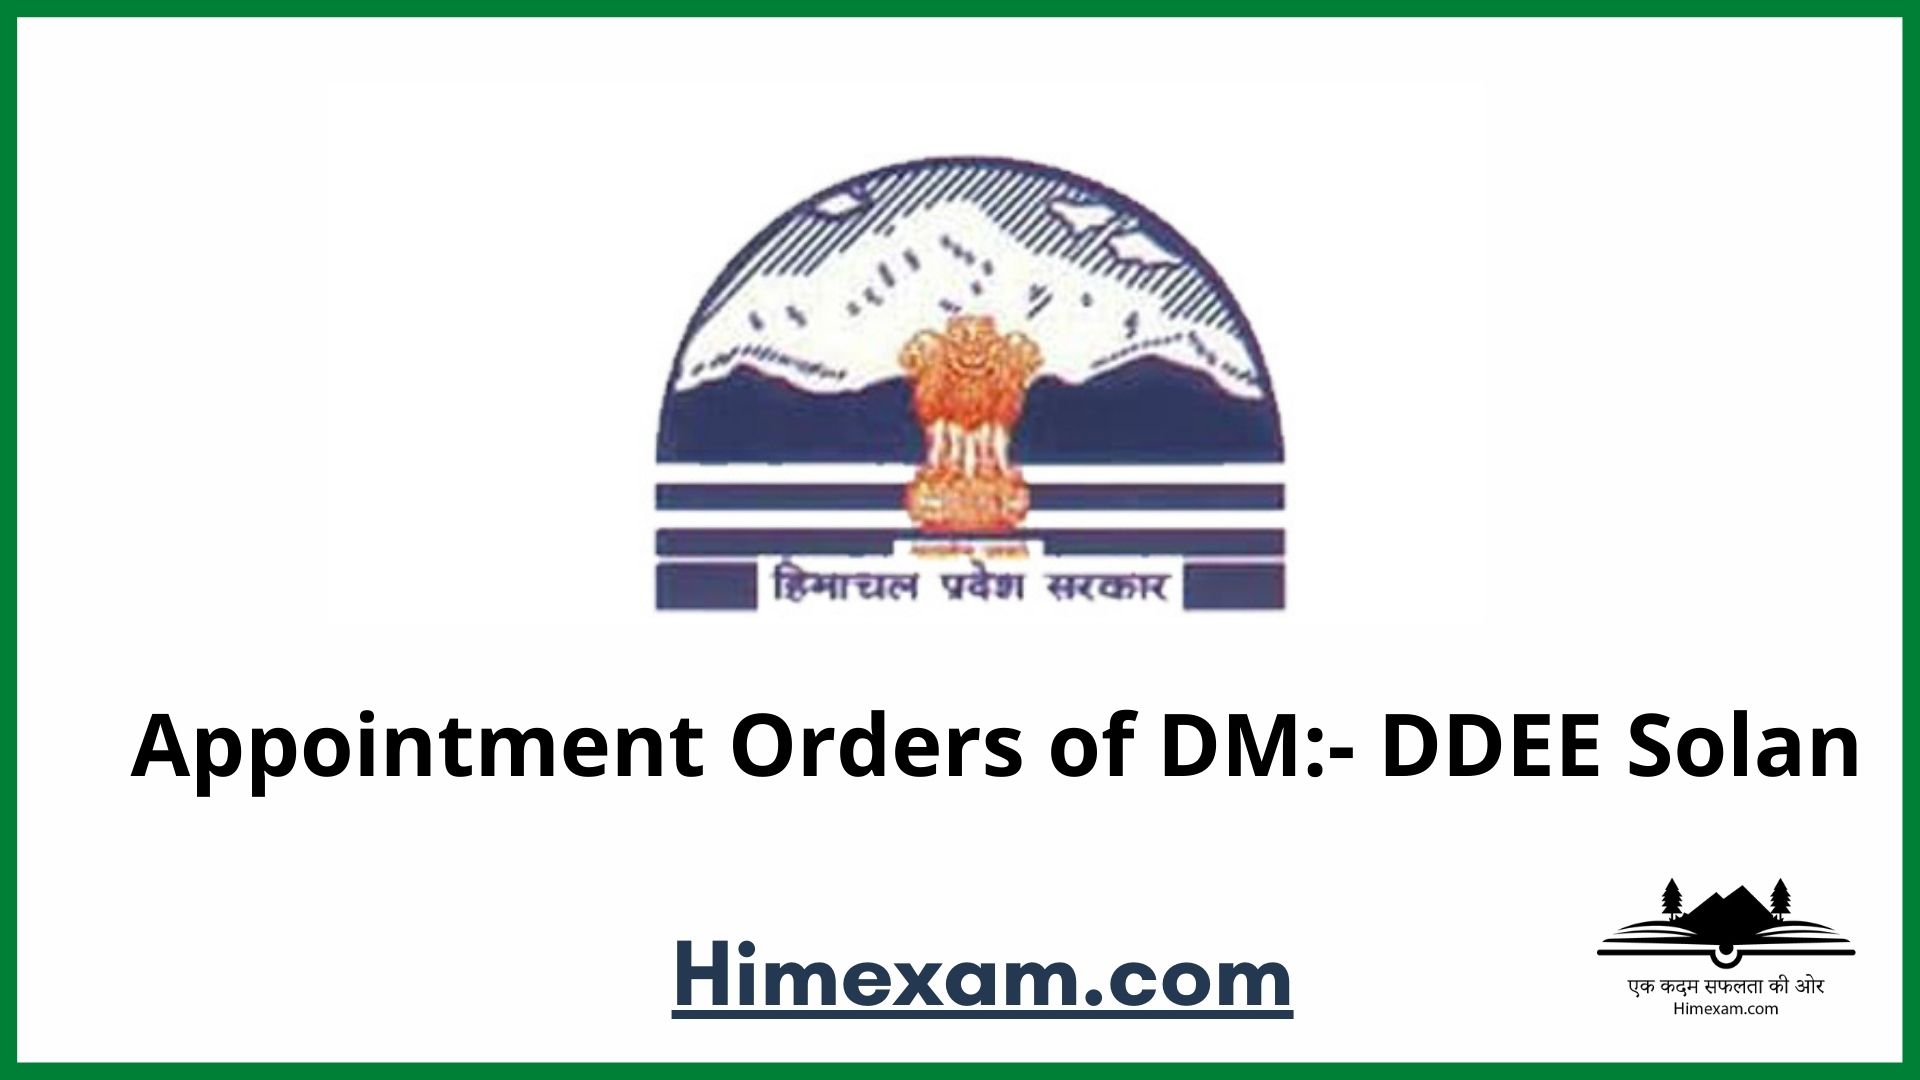 Appointment Orders of DM:- DDEE Solan